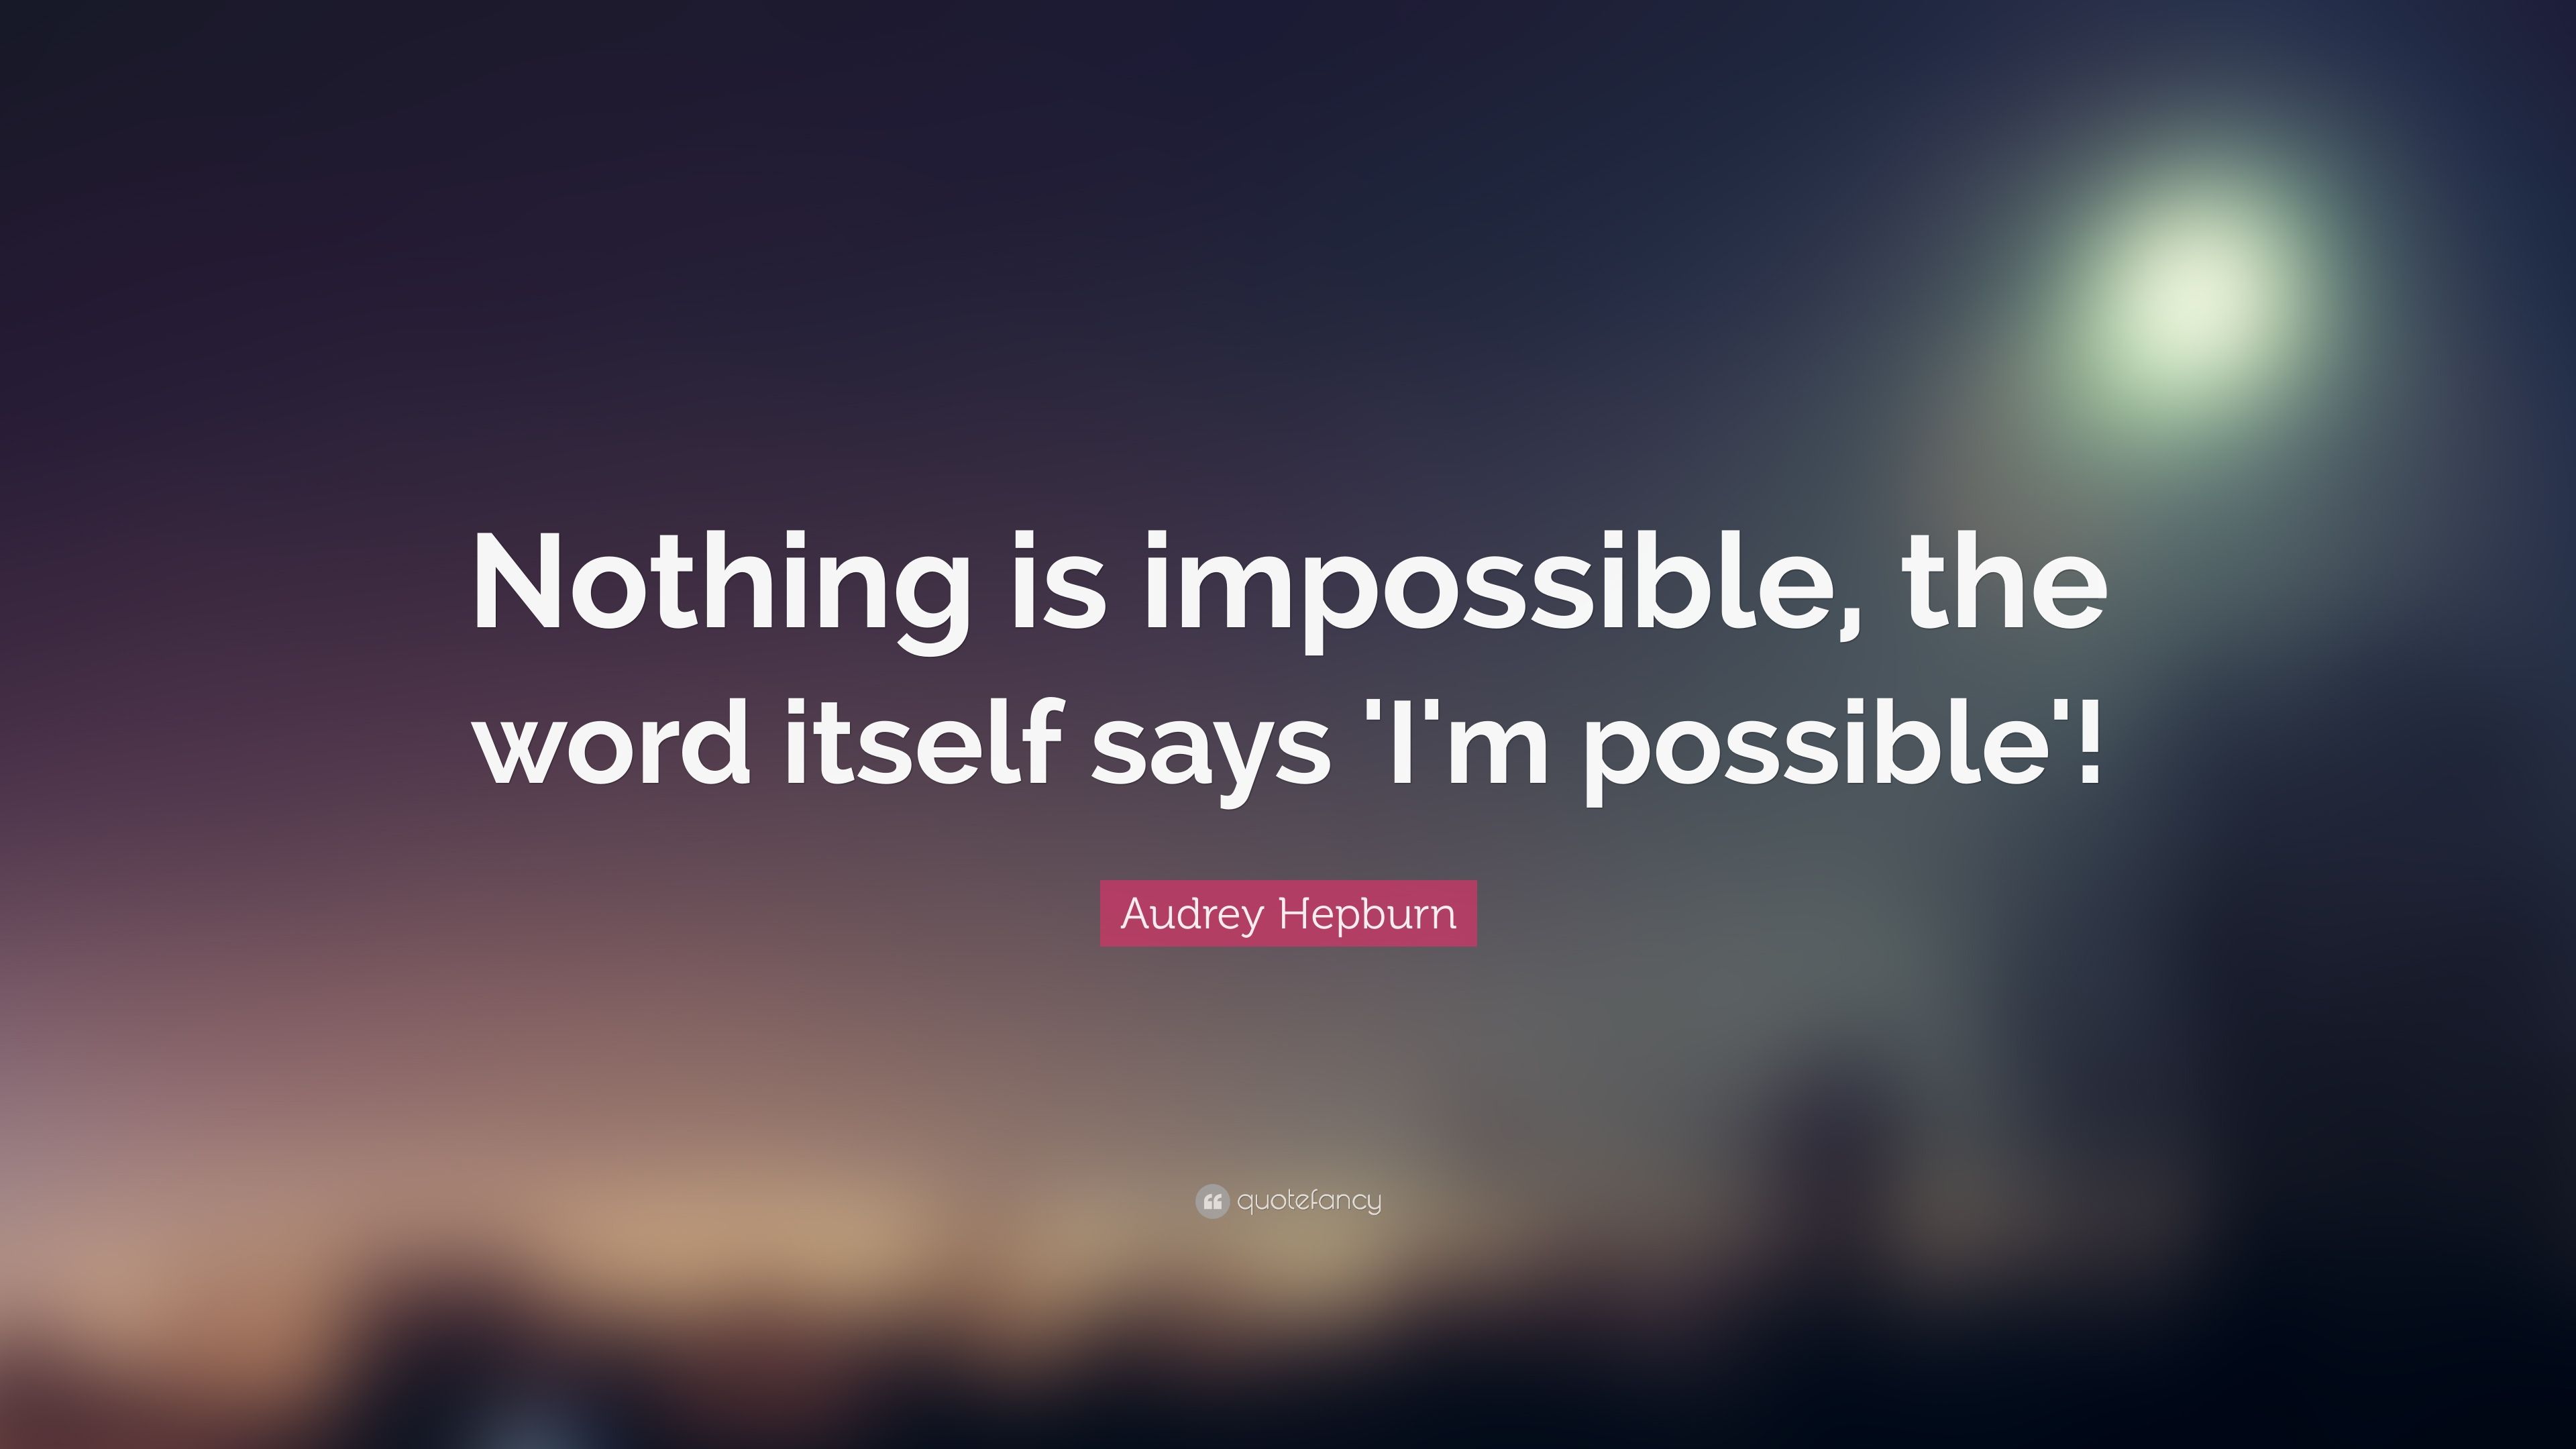 Audrey Hepburn Quote: “Nothing is impossible, the word itself says 'I'm possible'!”